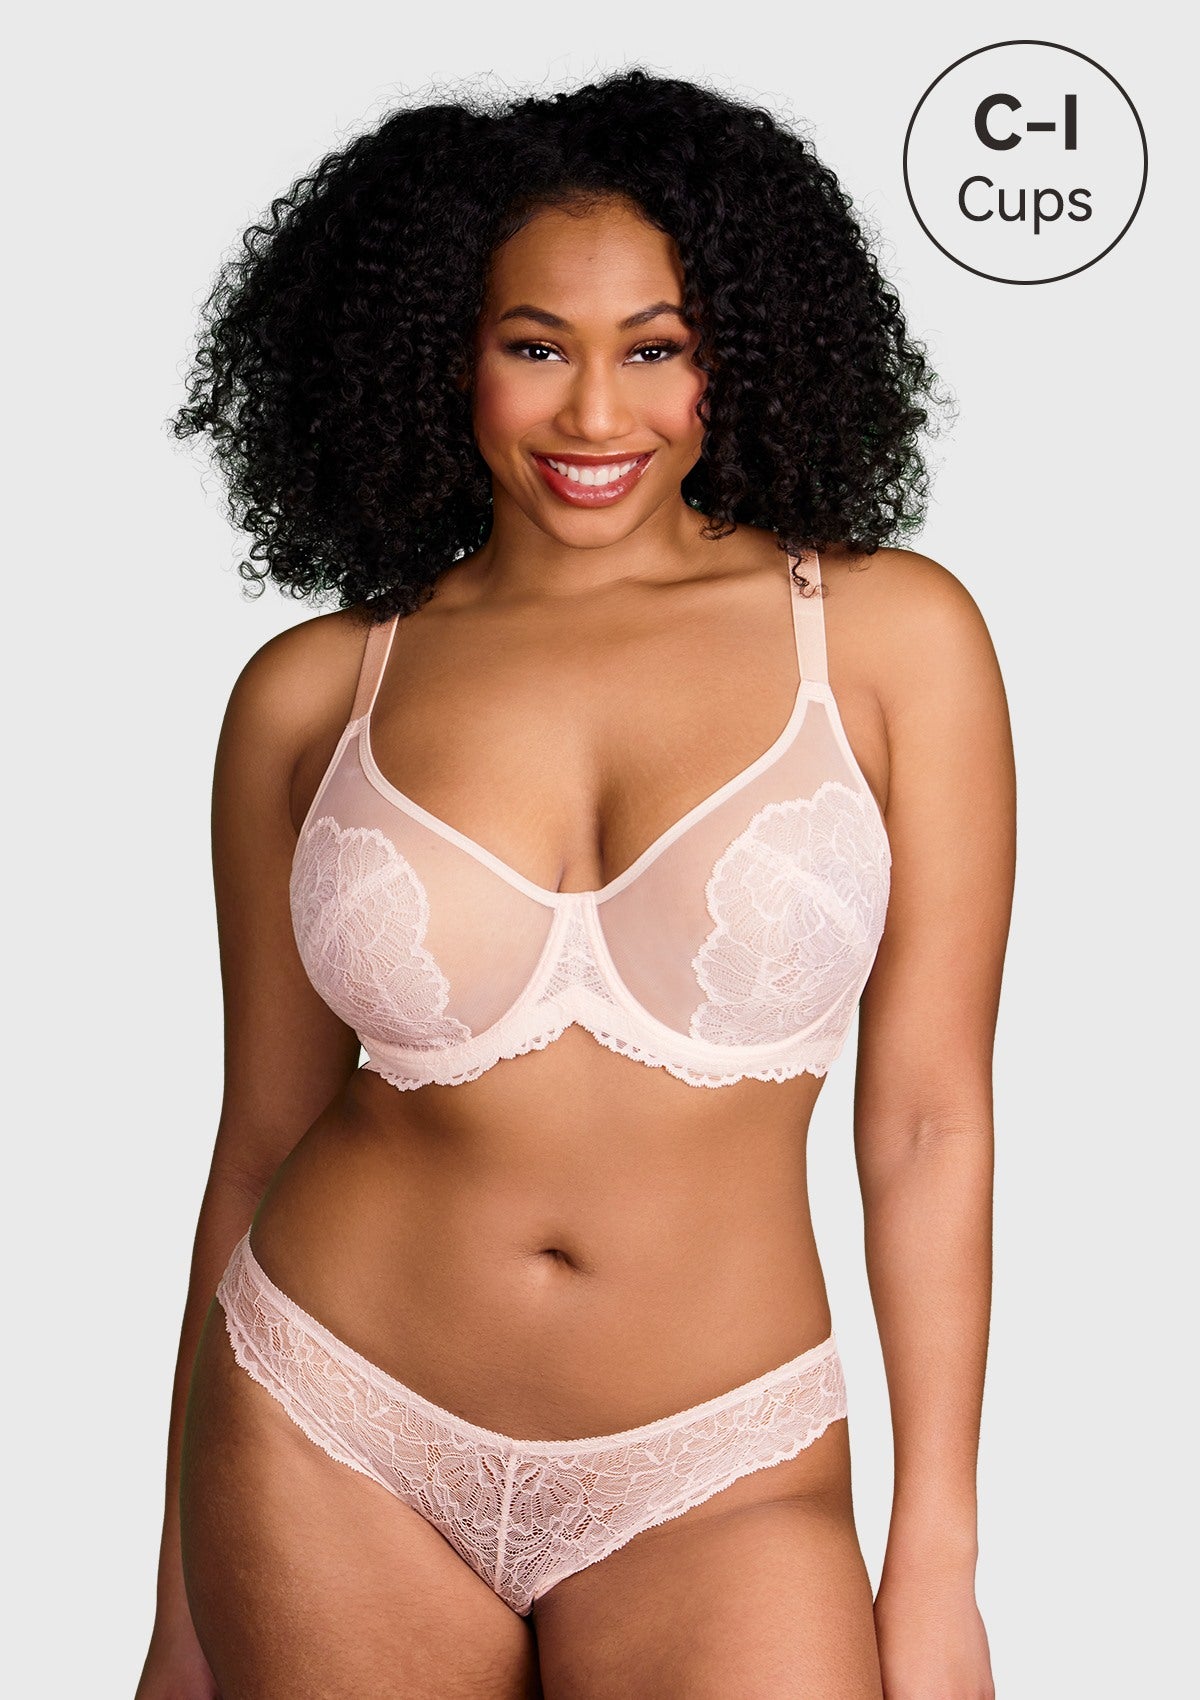 HSIA Blossom Sheer Lace Bra: Comfortable Underwire Bra For Big Busts - Dusty Peach / 42 / G